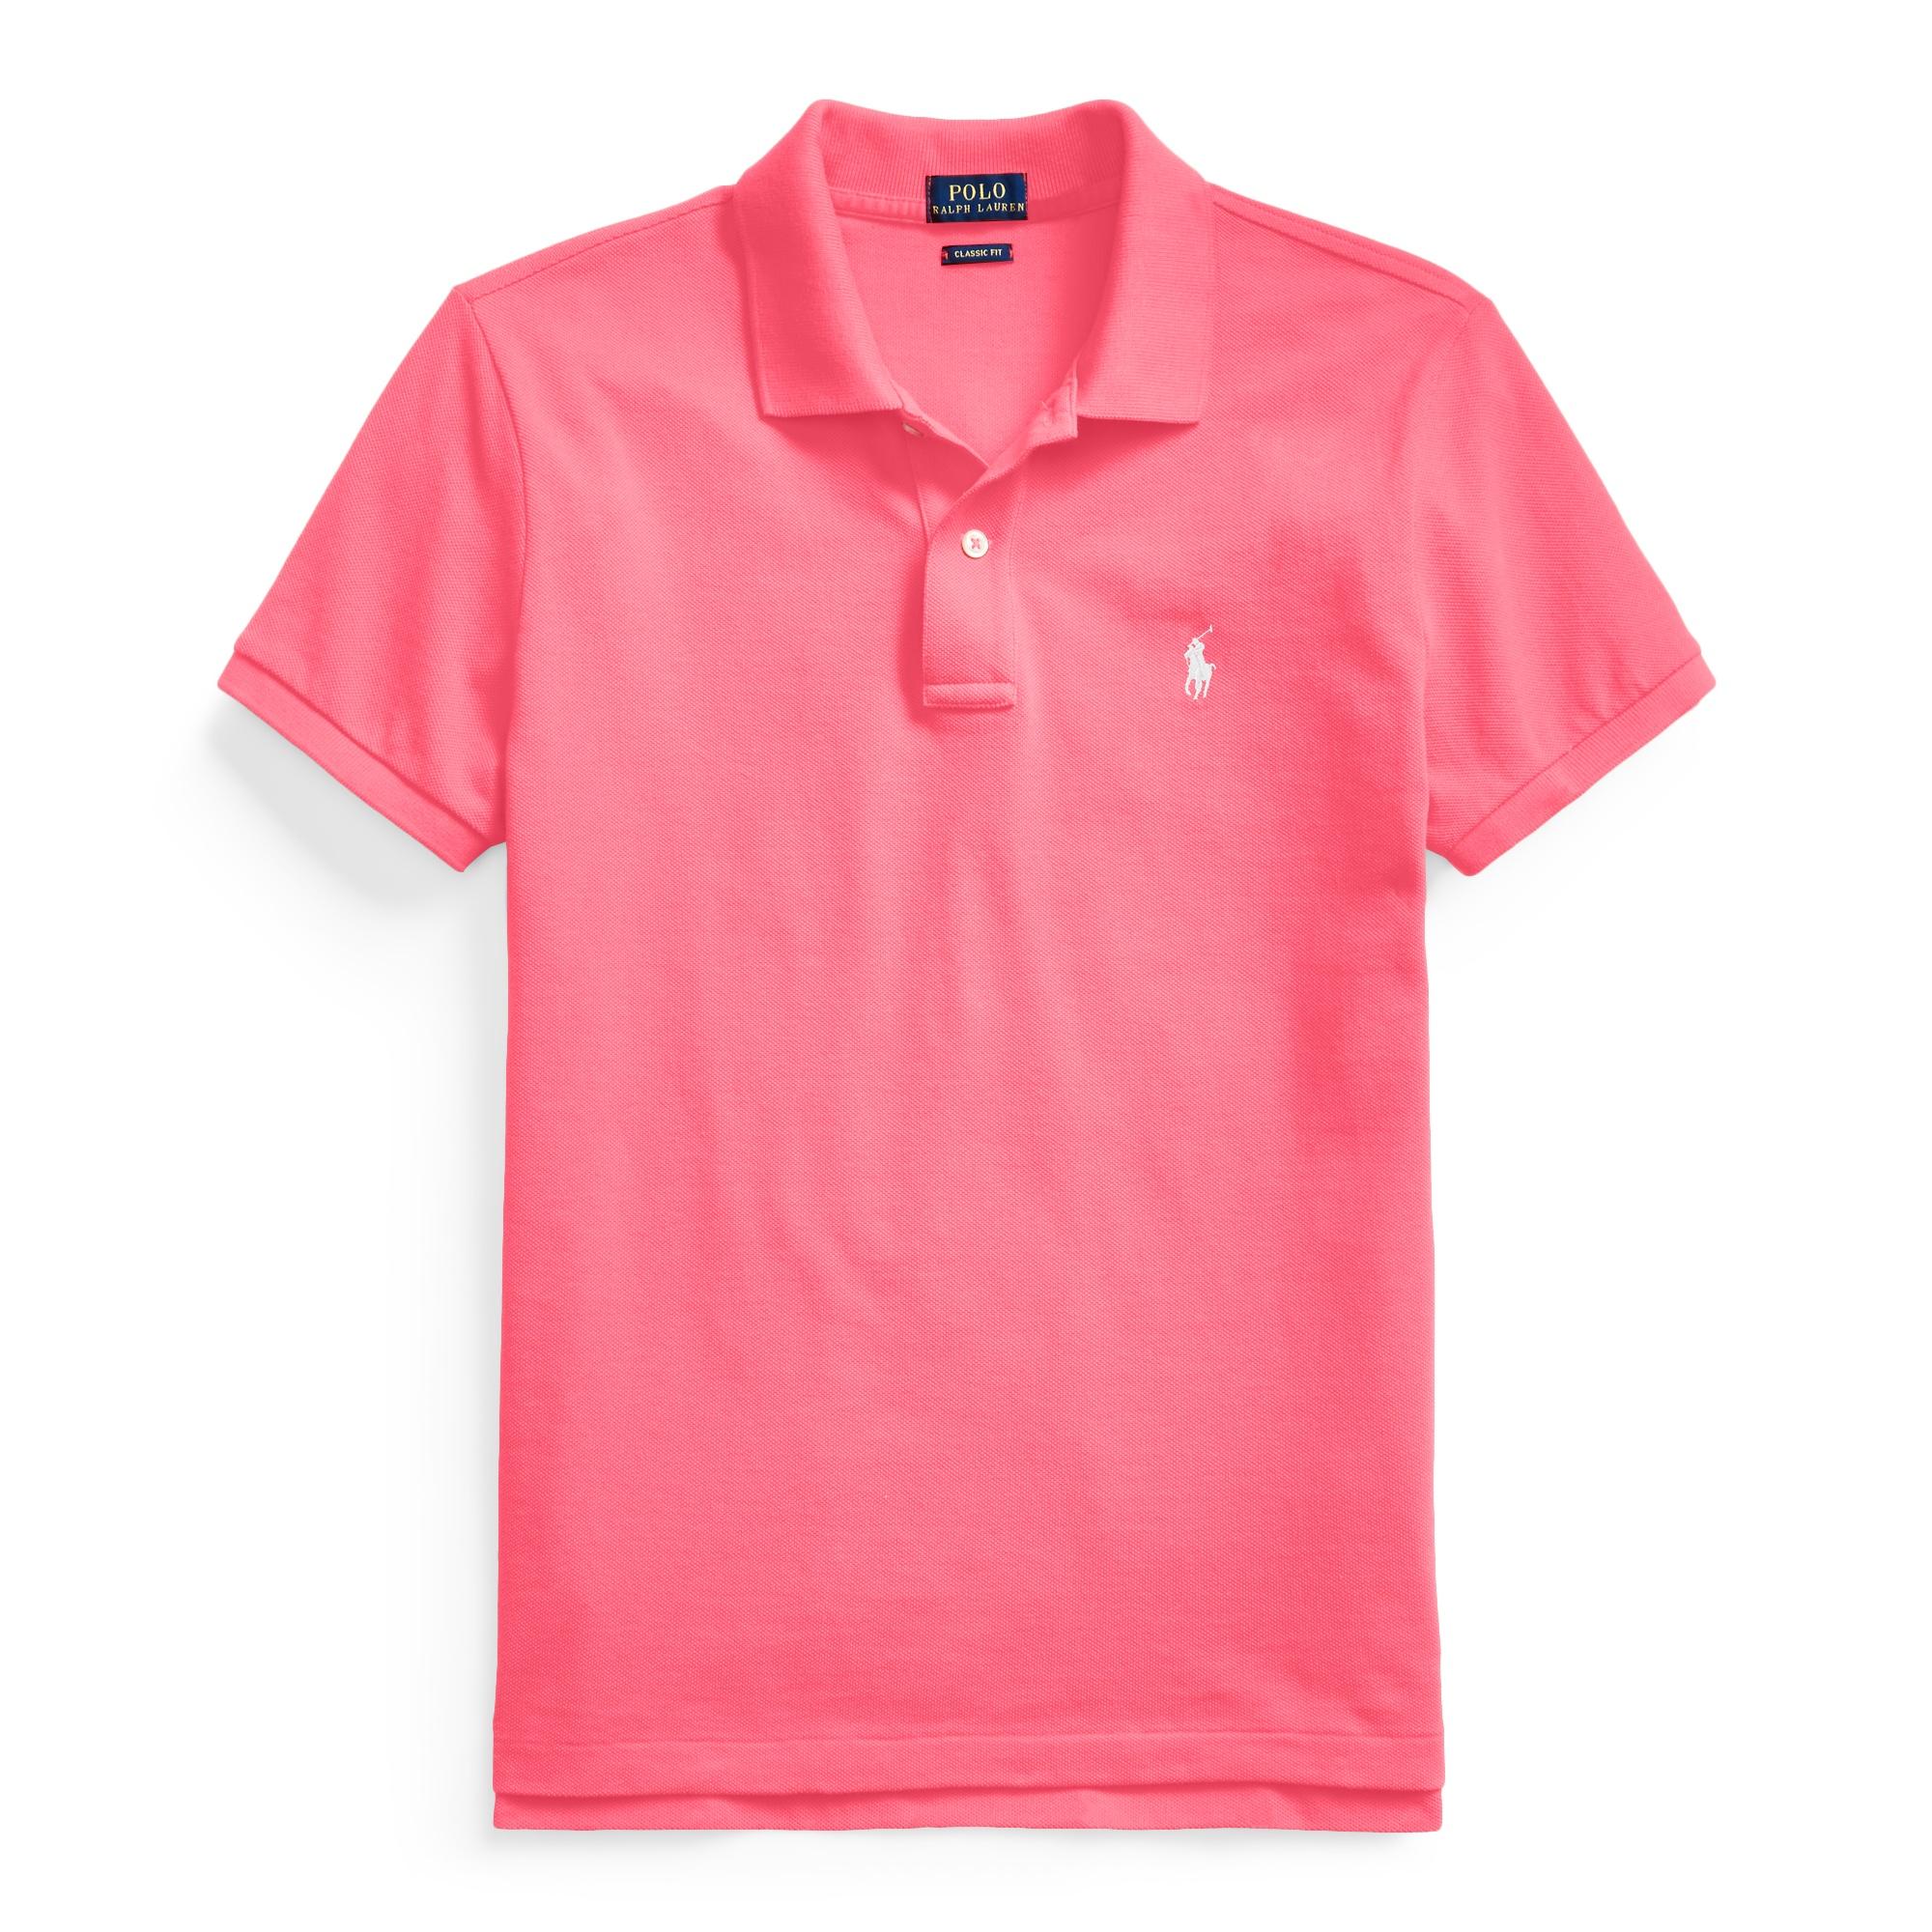 Ralph Lauren Cotton Classic Fit Mesh Polo Shirt in Hot Pink (Pink) - Lyst